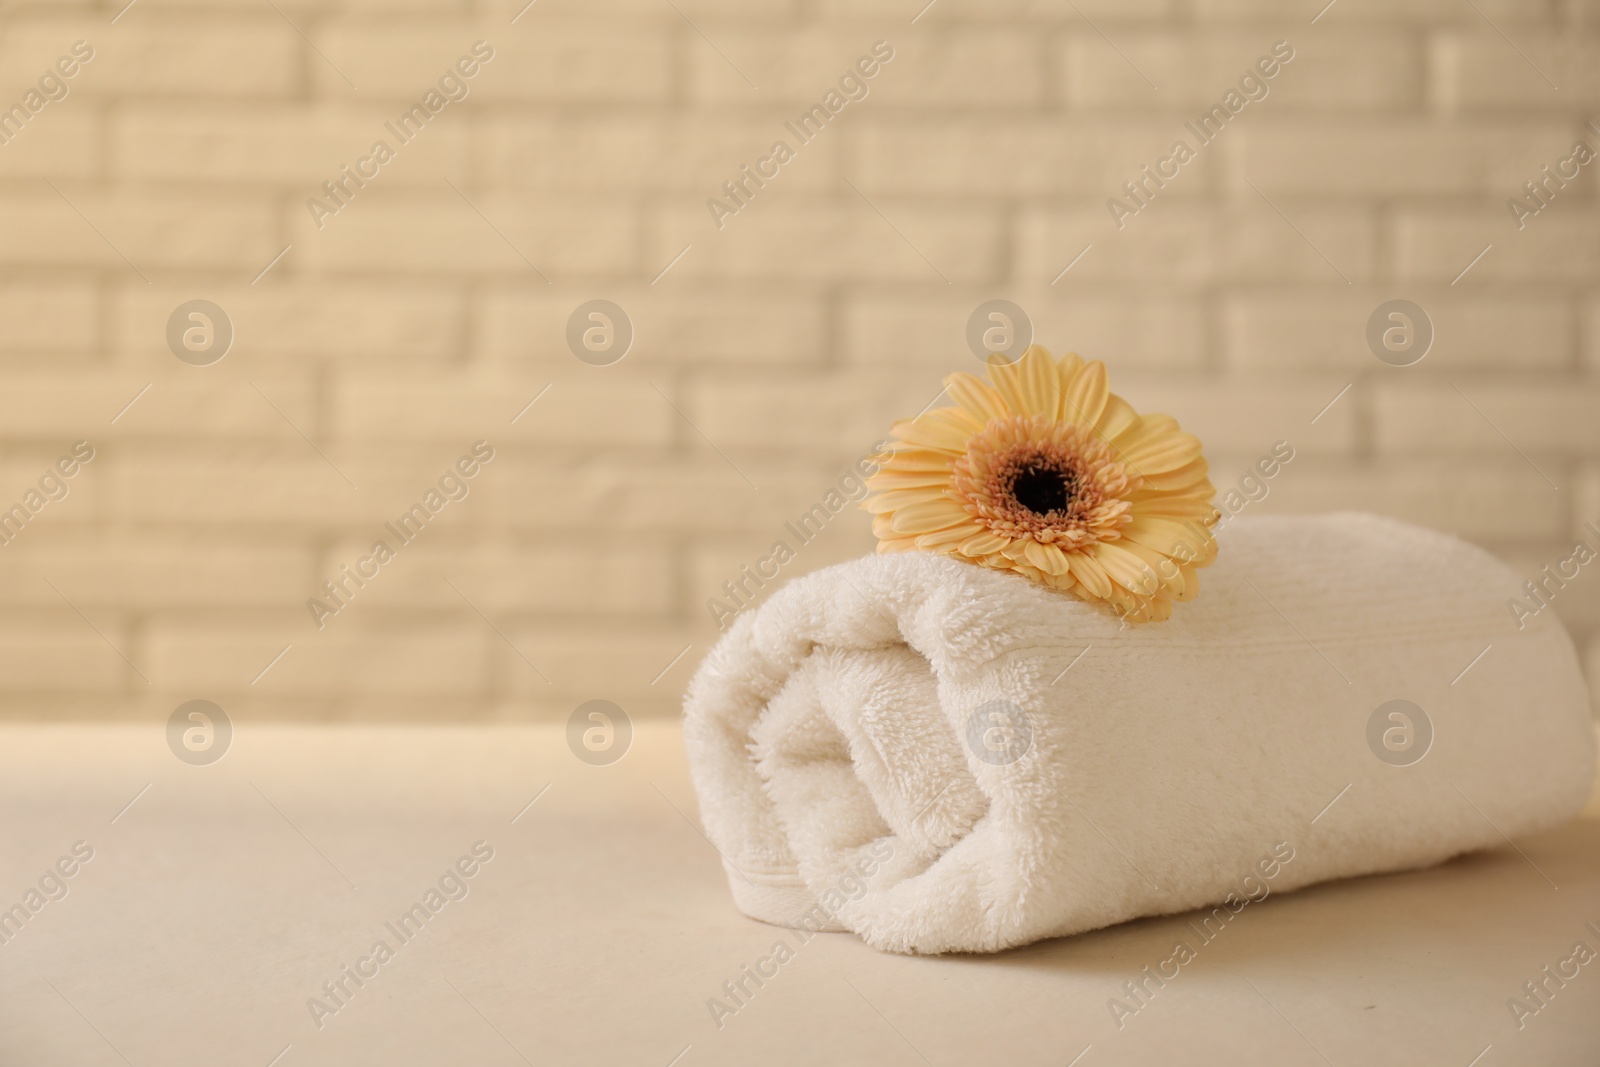 Photo of Rolled terry towel and flower on white table near brick wall indoors, closeup. Space for text